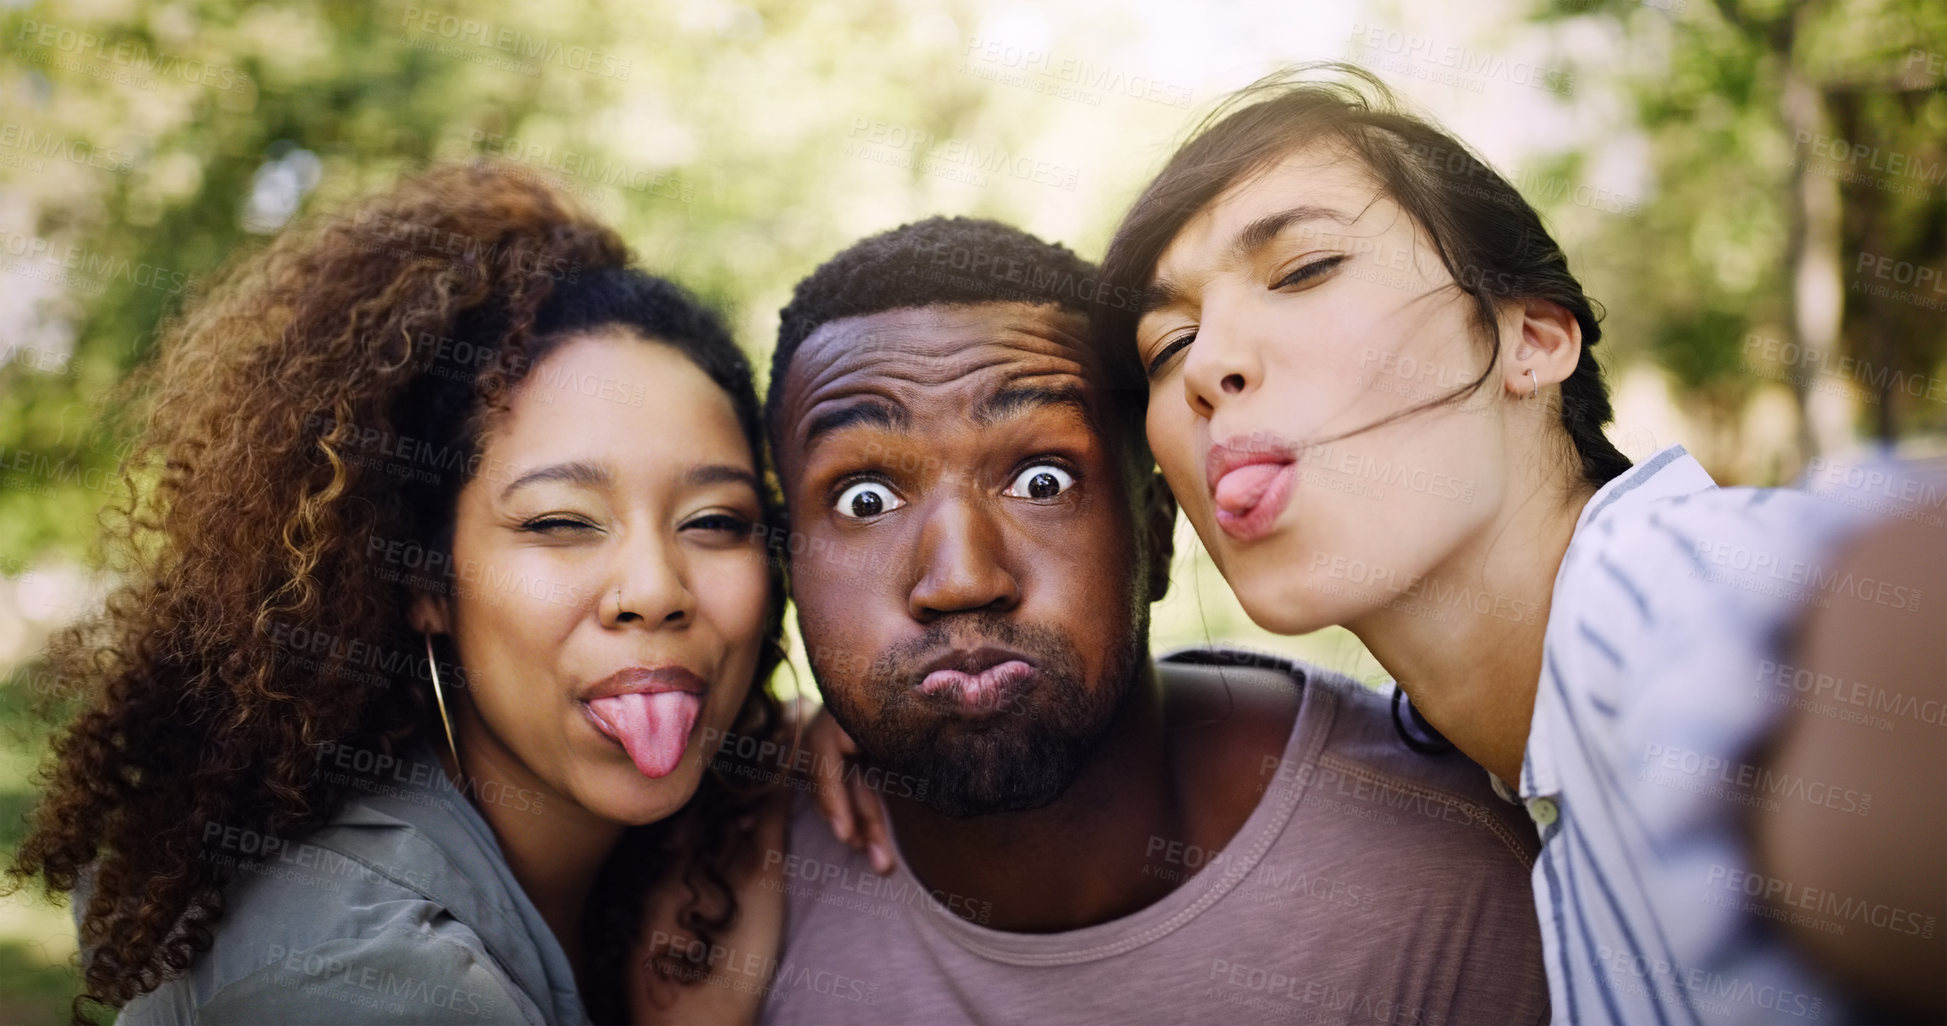 Buy stock photo Diversity, friends and happy in park selfie, pov and photography for memory or social media post. Summer, bonding and together in funny or silly portrait, friendship and internet content on vacation